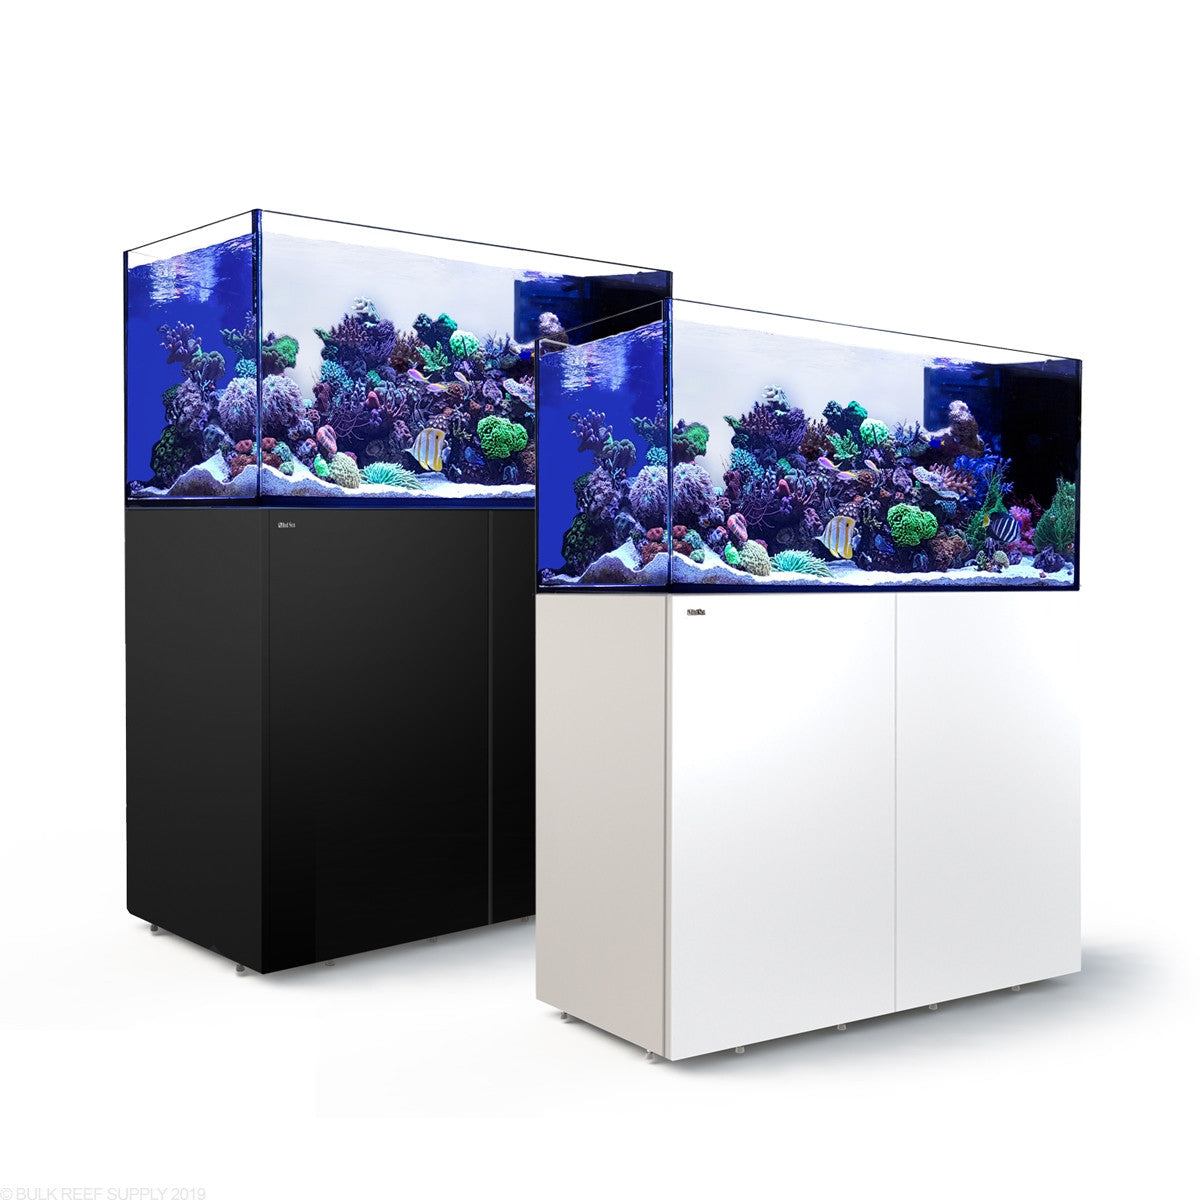 RedSea Reefer Peninsula P500 Complete System